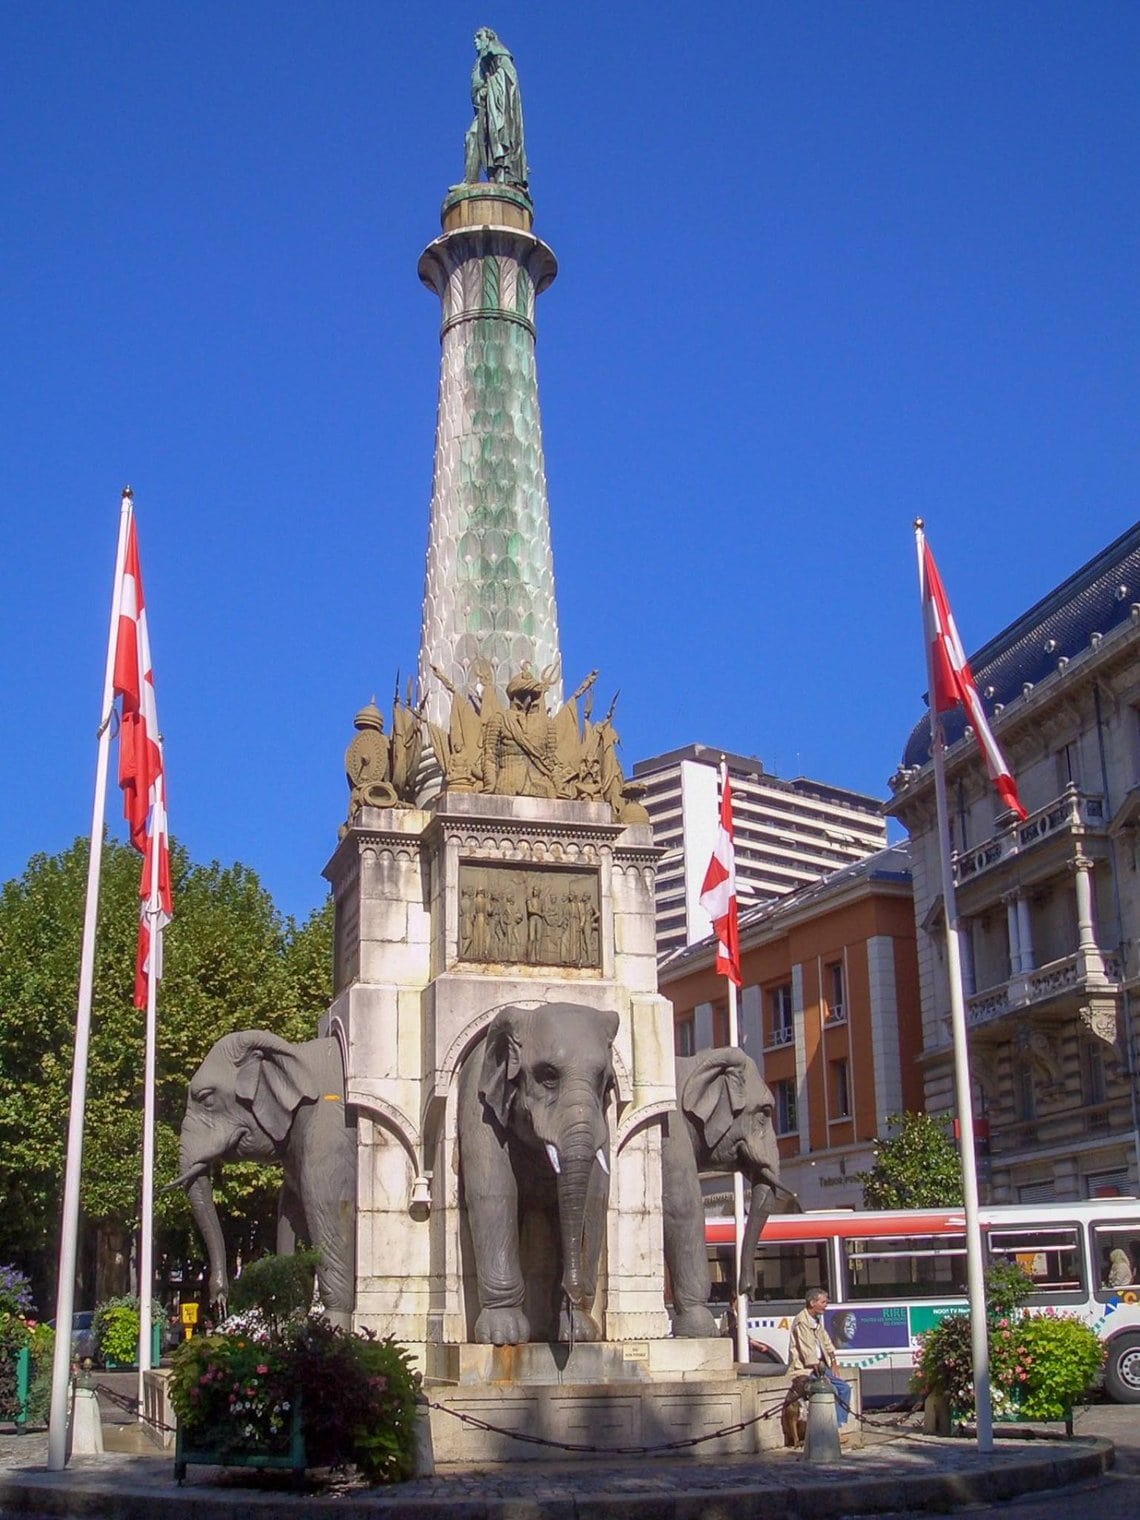 Centre of Chambery where the infamous elephant statue towers over the city.